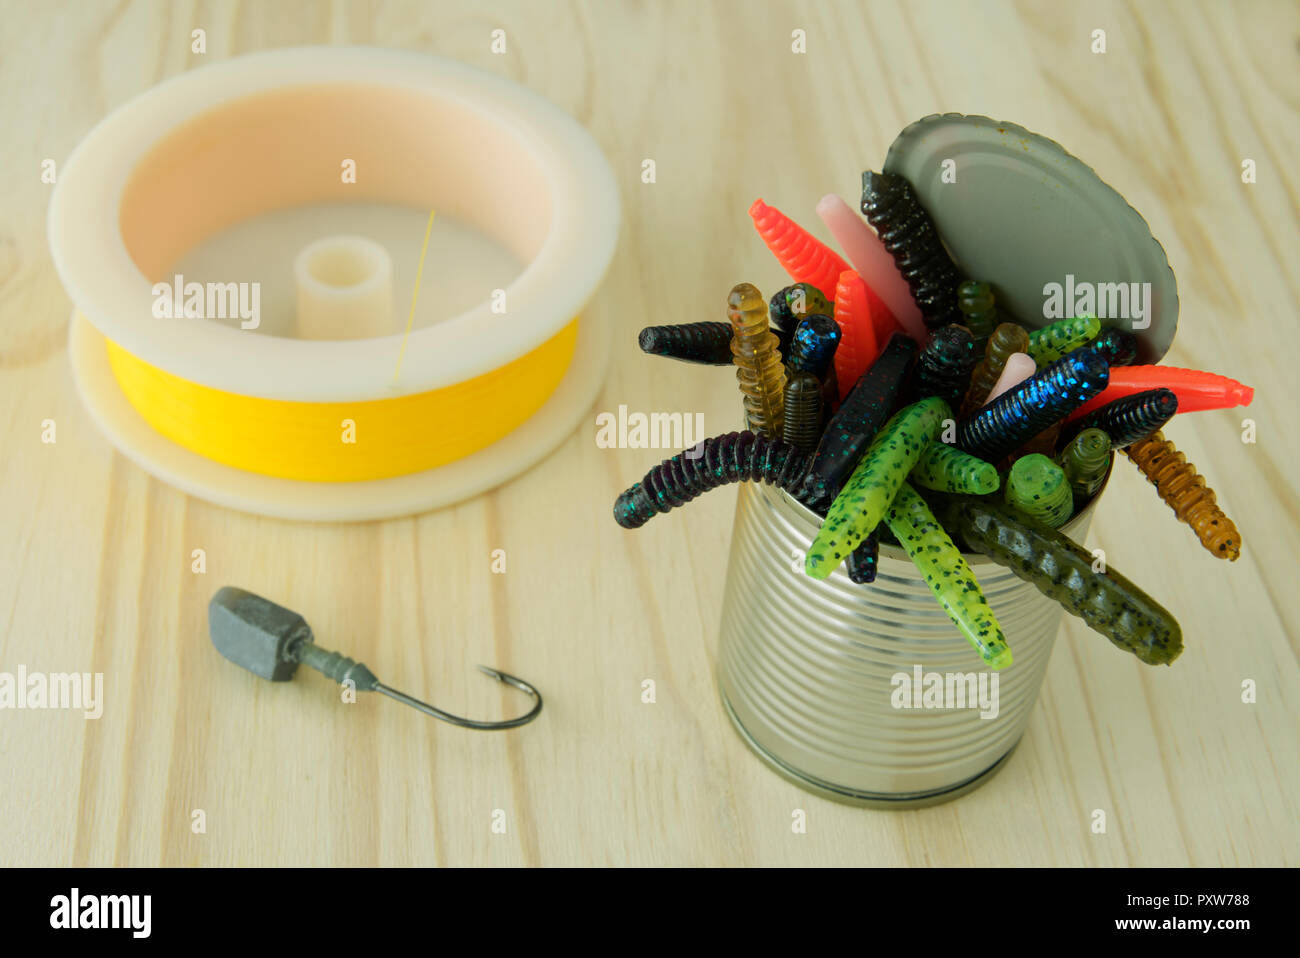 https://c8.alamy.com/comp/PXW788/tin-can-of-colourful-artificial-plastic-worms-with-yellow-fishing-line-and-lead-jig-head-hook-PXW788.jpg